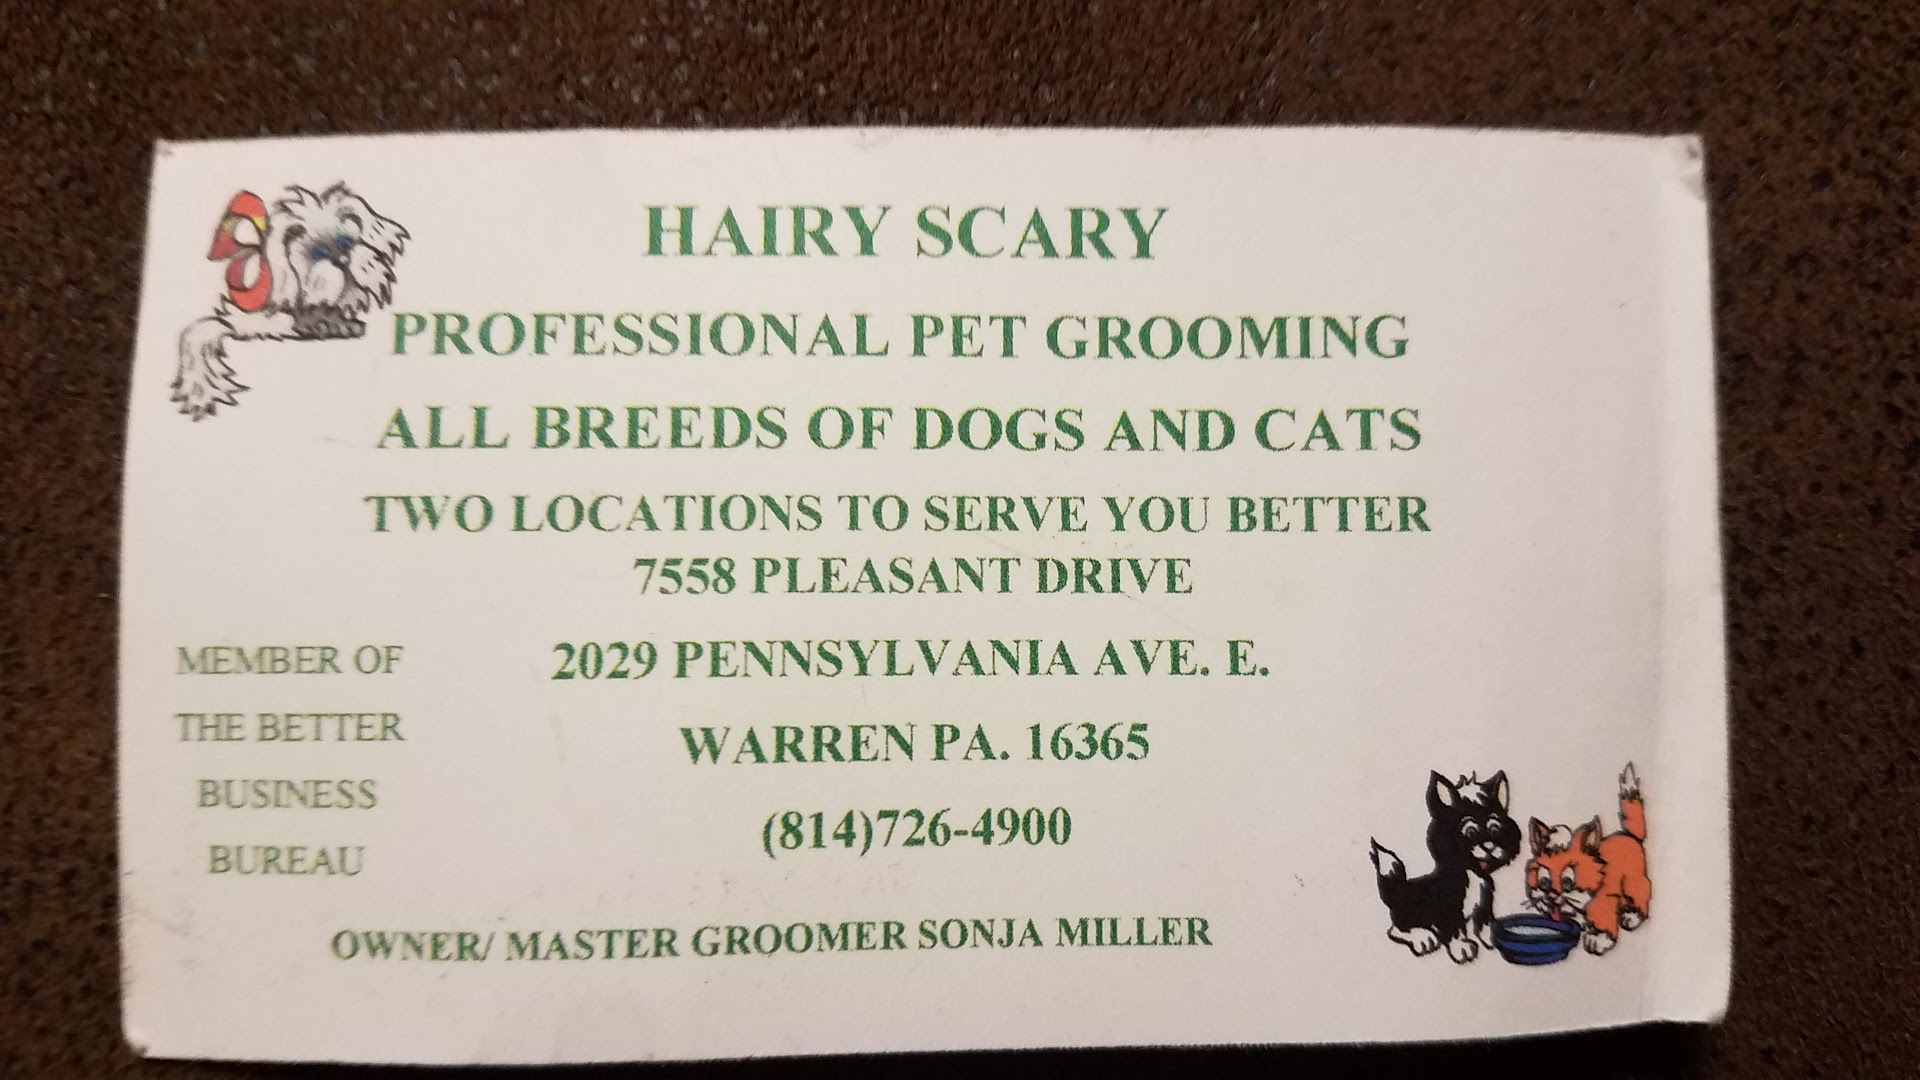 Hairy Scary Pet Grooming